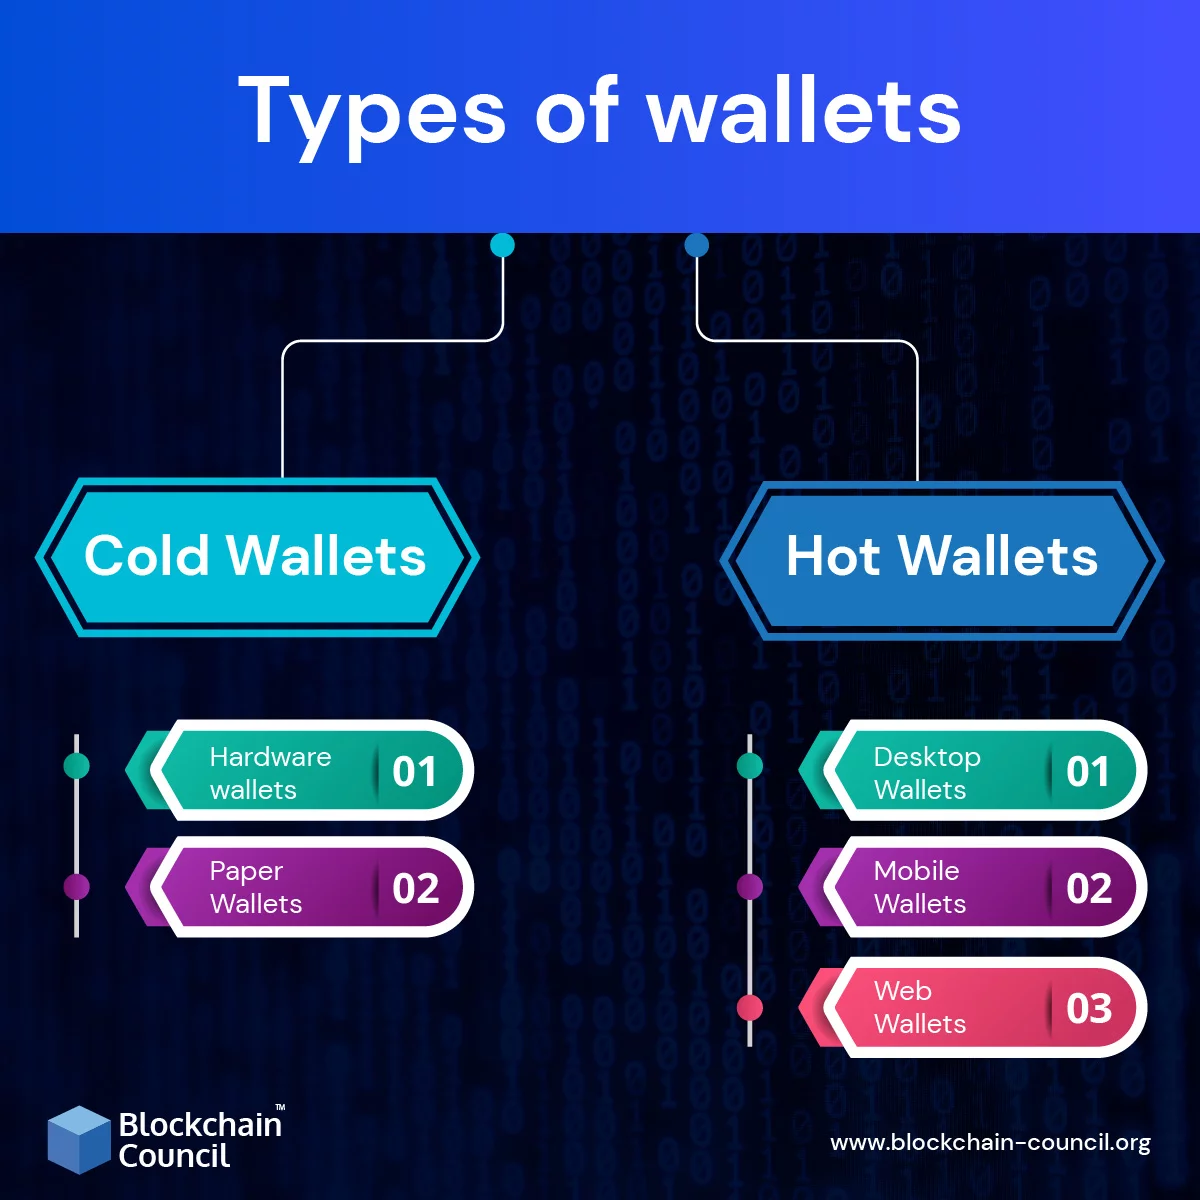 Types of wallets